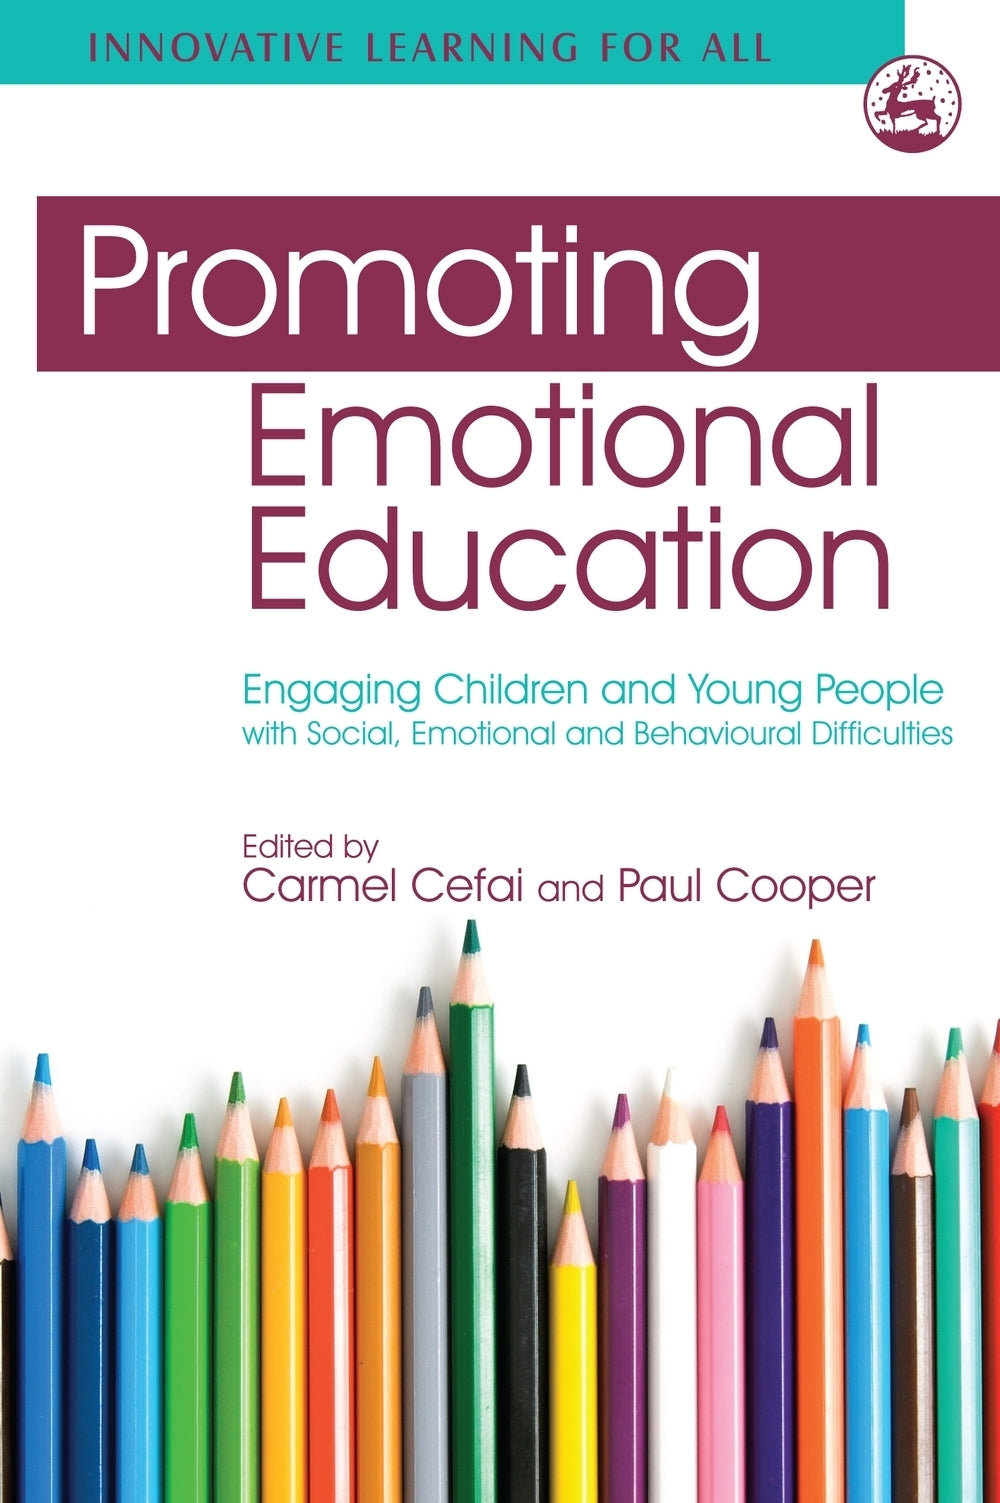 Promoting Emotional Education by No Author Listed, Paul Cooper, Carmel Cefai